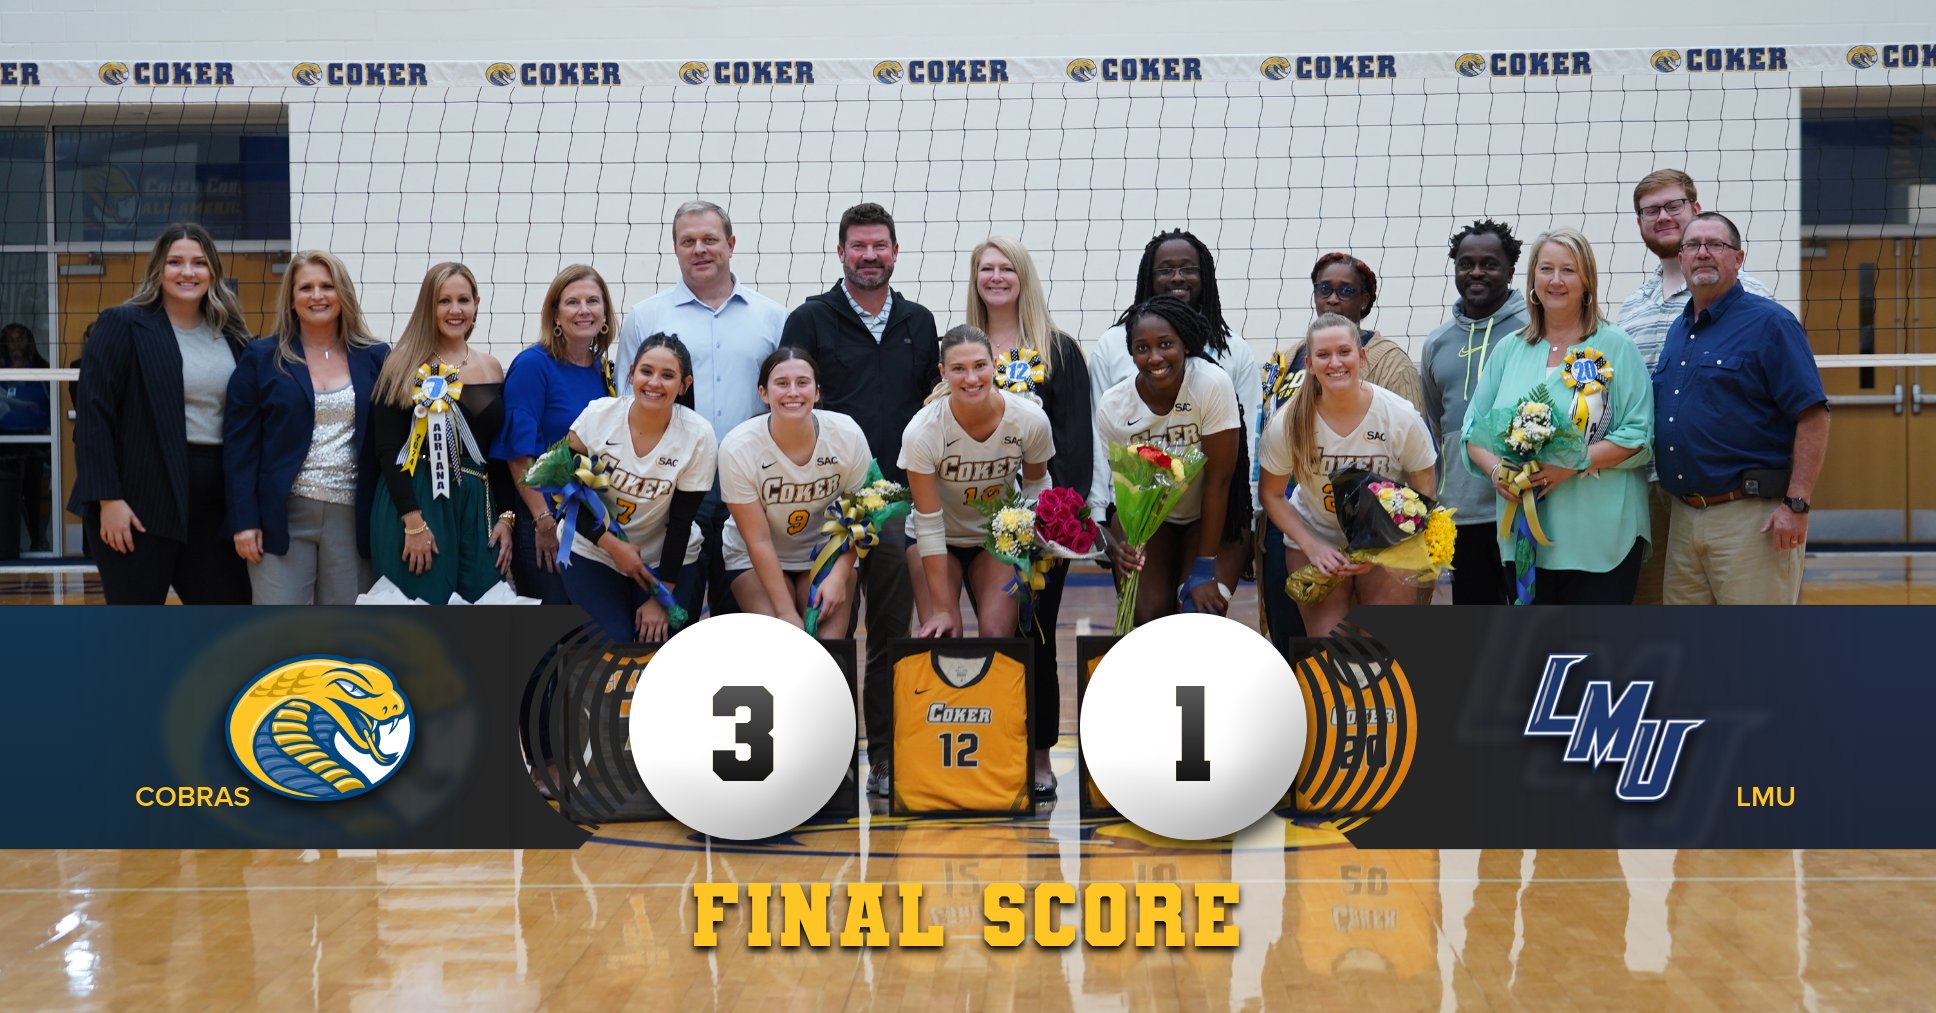 Coker Comes Out on Top on Senior Night 3-1